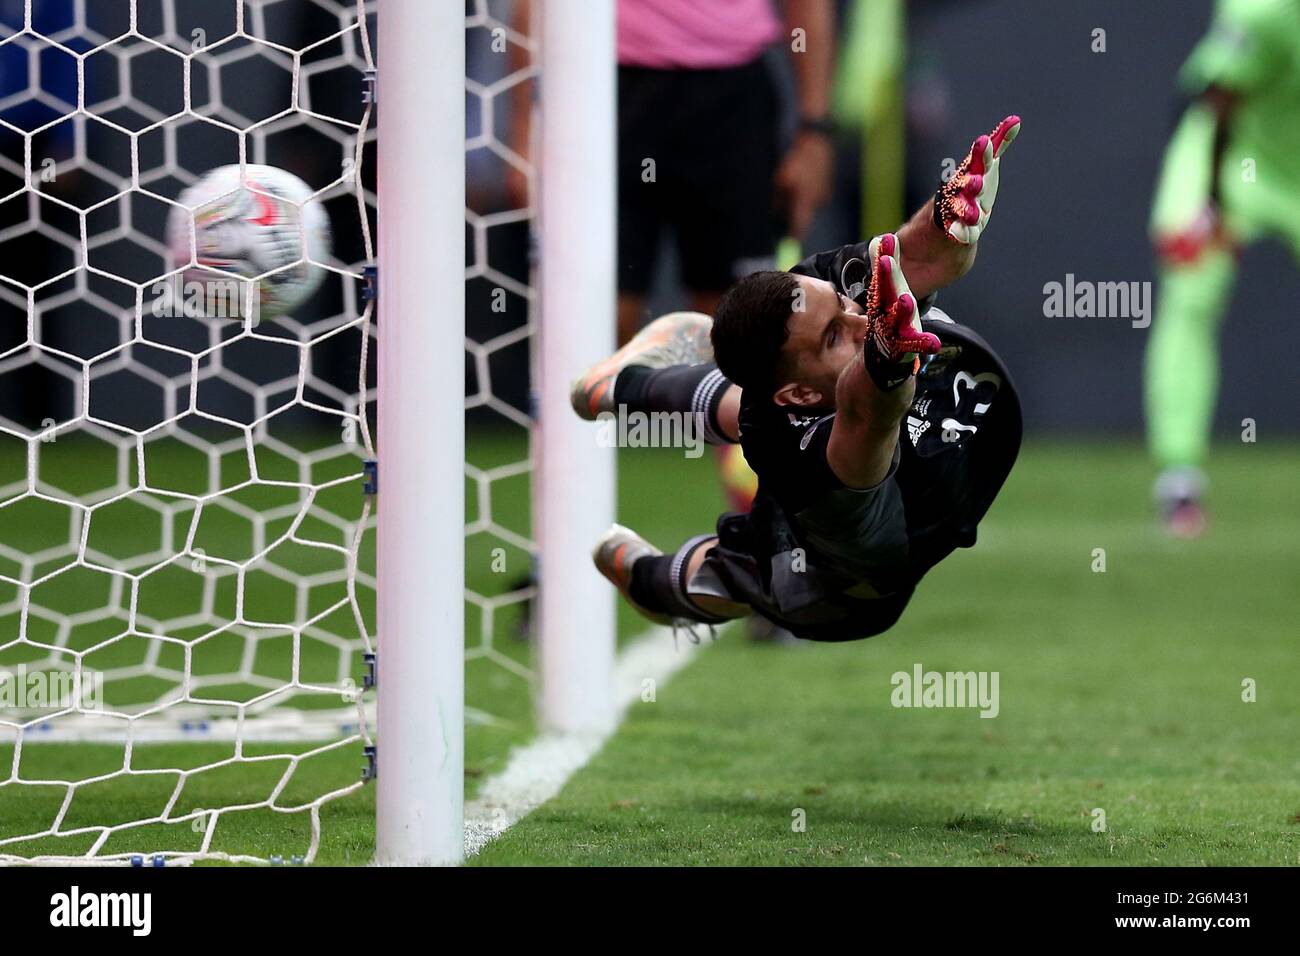 BRASILIA, BRAZIL - JULY 06: Emiliano Martinez Goalkeeper of Argentina dives during a shootout ,after a the Semifinal match between Argentina and Colombia as part of Conmebol Copa America Brazil 2021 at Mane Garrincha Stadium on July 6, 2021 in Brasilia, Brazil. (MB Media) Stock Photo